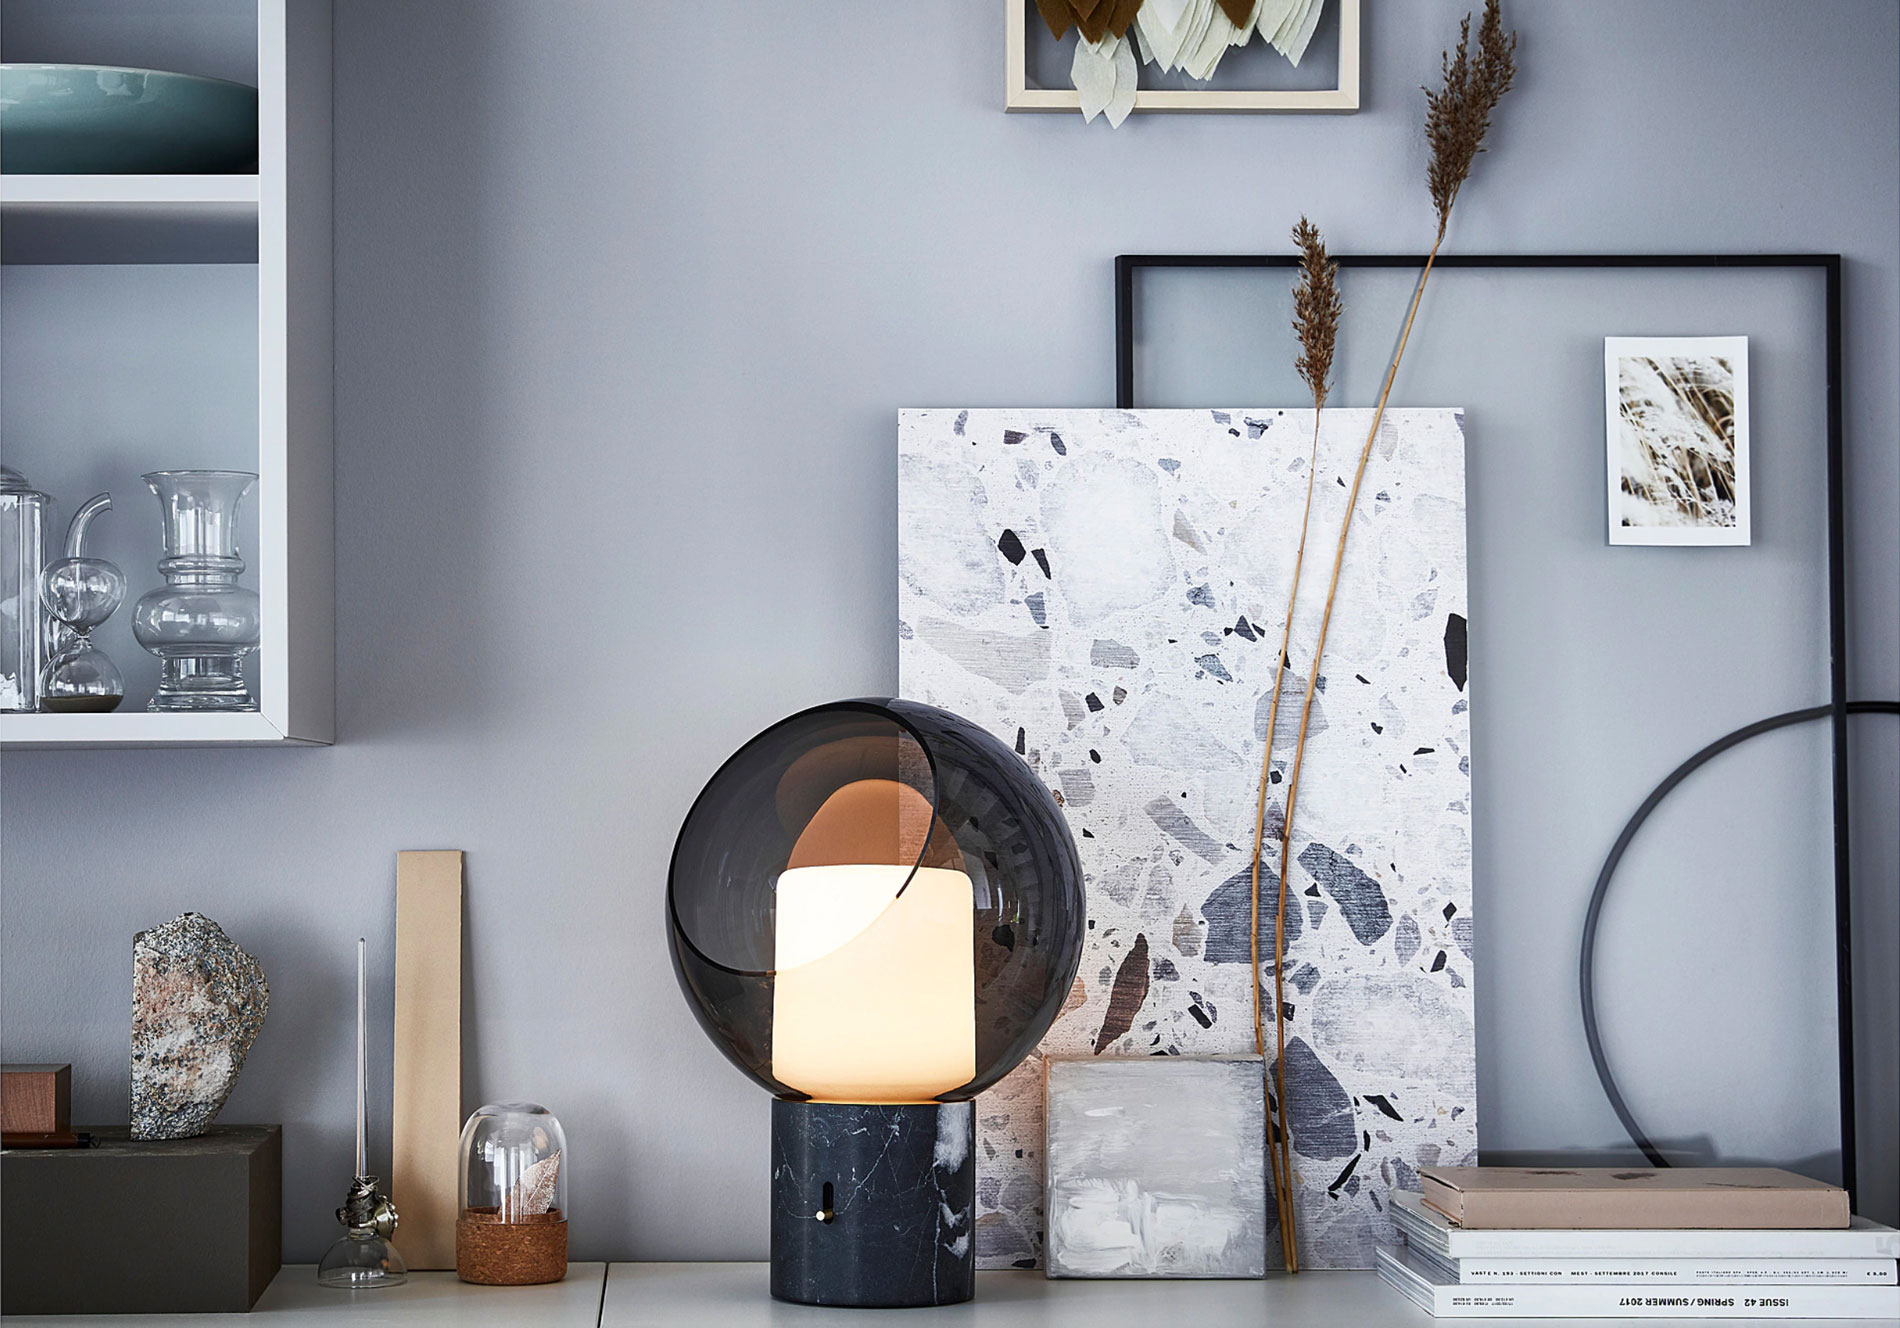 An Ikea table lamp that looks just like a designer piece